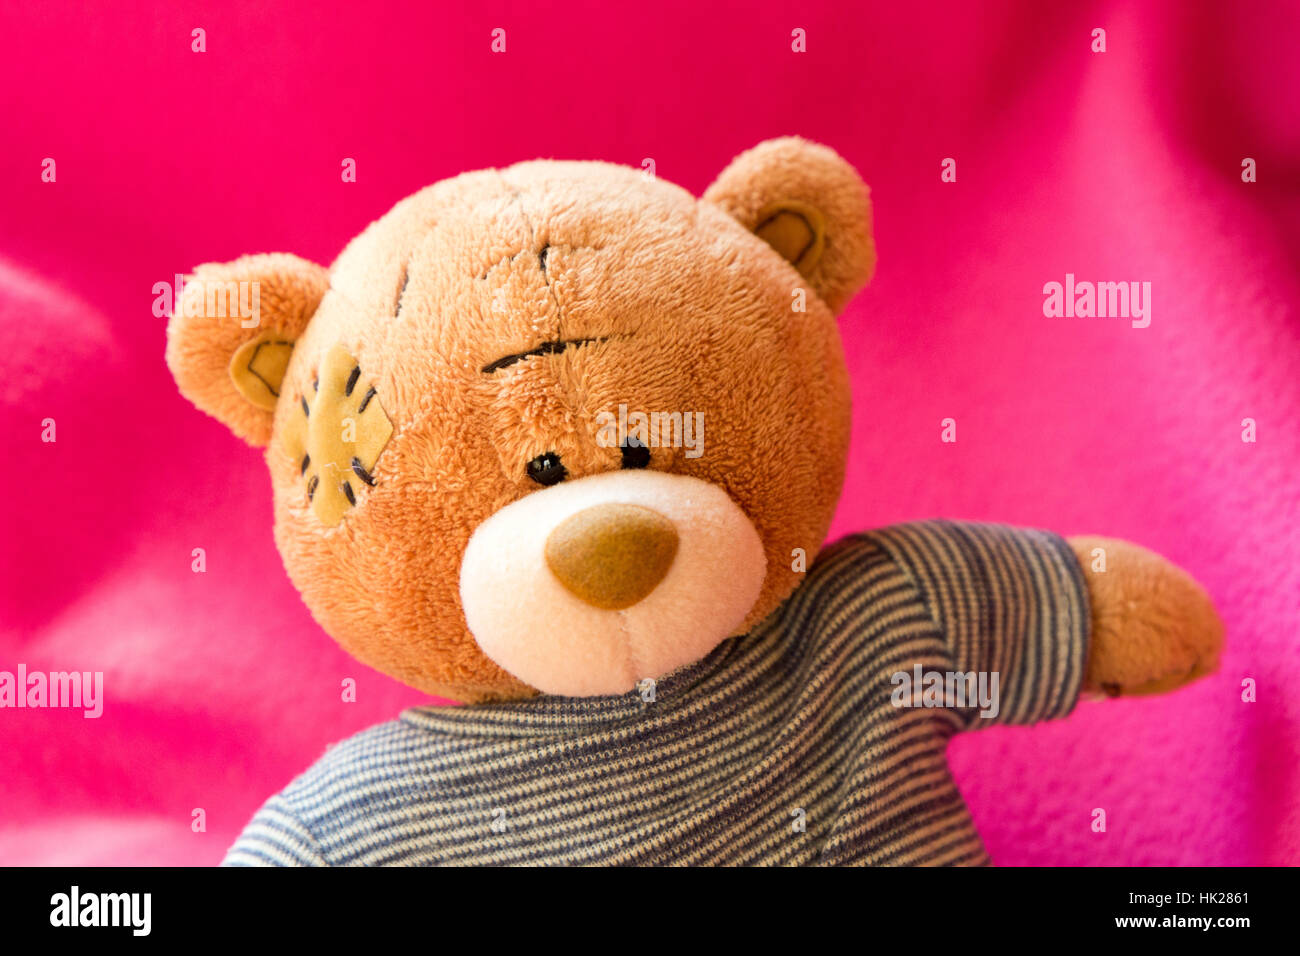 A cute 'me to you' teddy bear on a pink background. Stock Photo